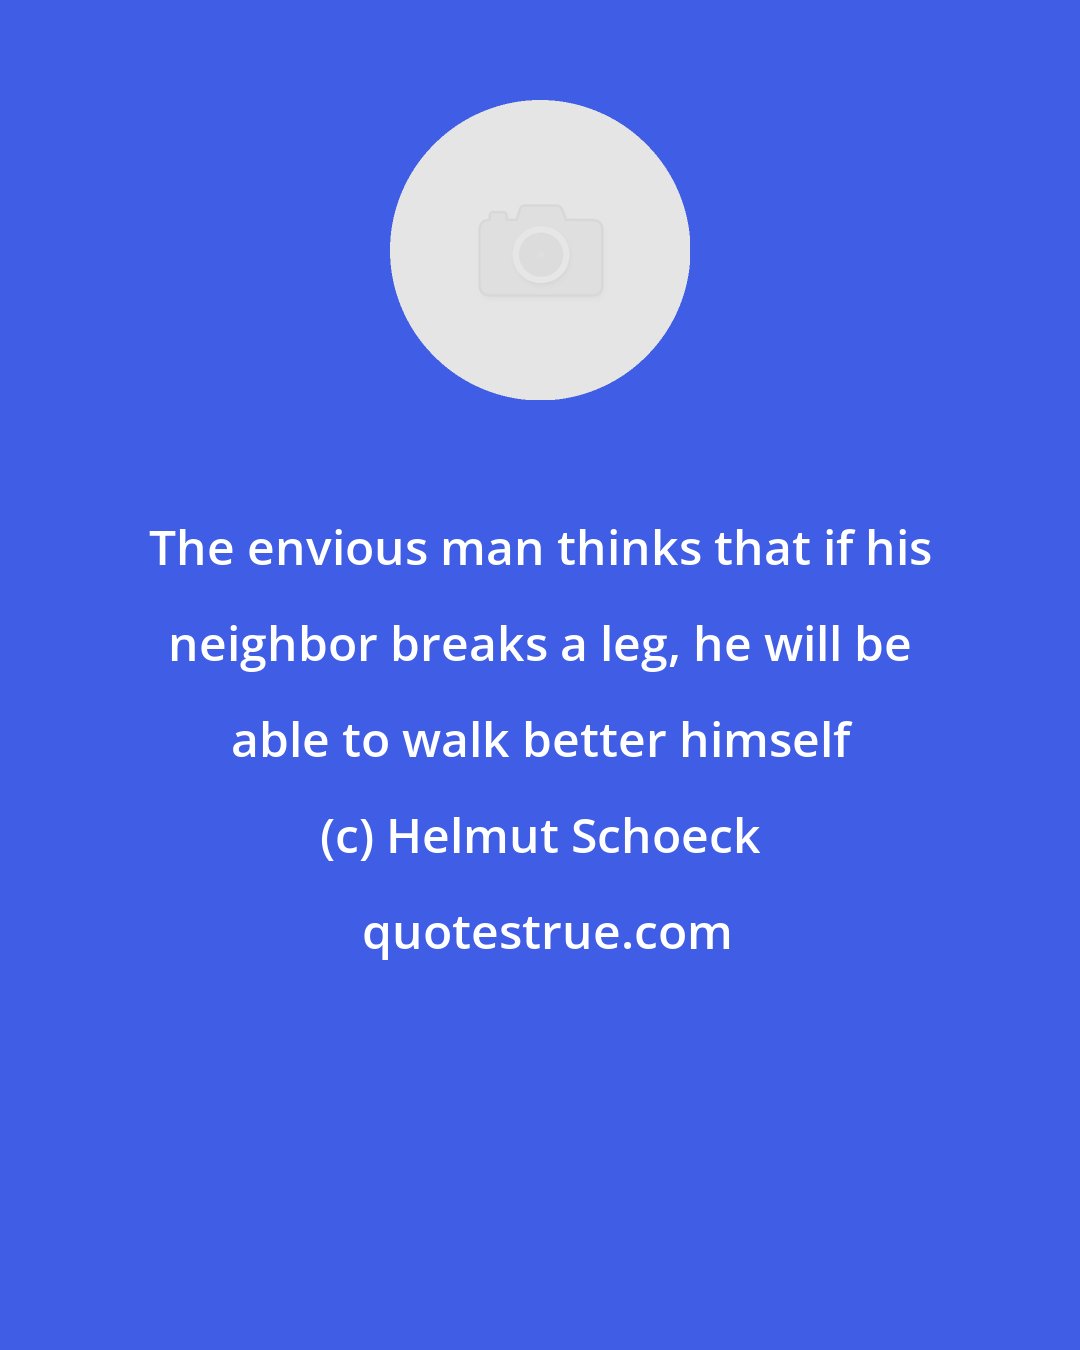 Helmut Schoeck: The envious man thinks that if his neighbor breaks a leg, he will be able to walk better himself